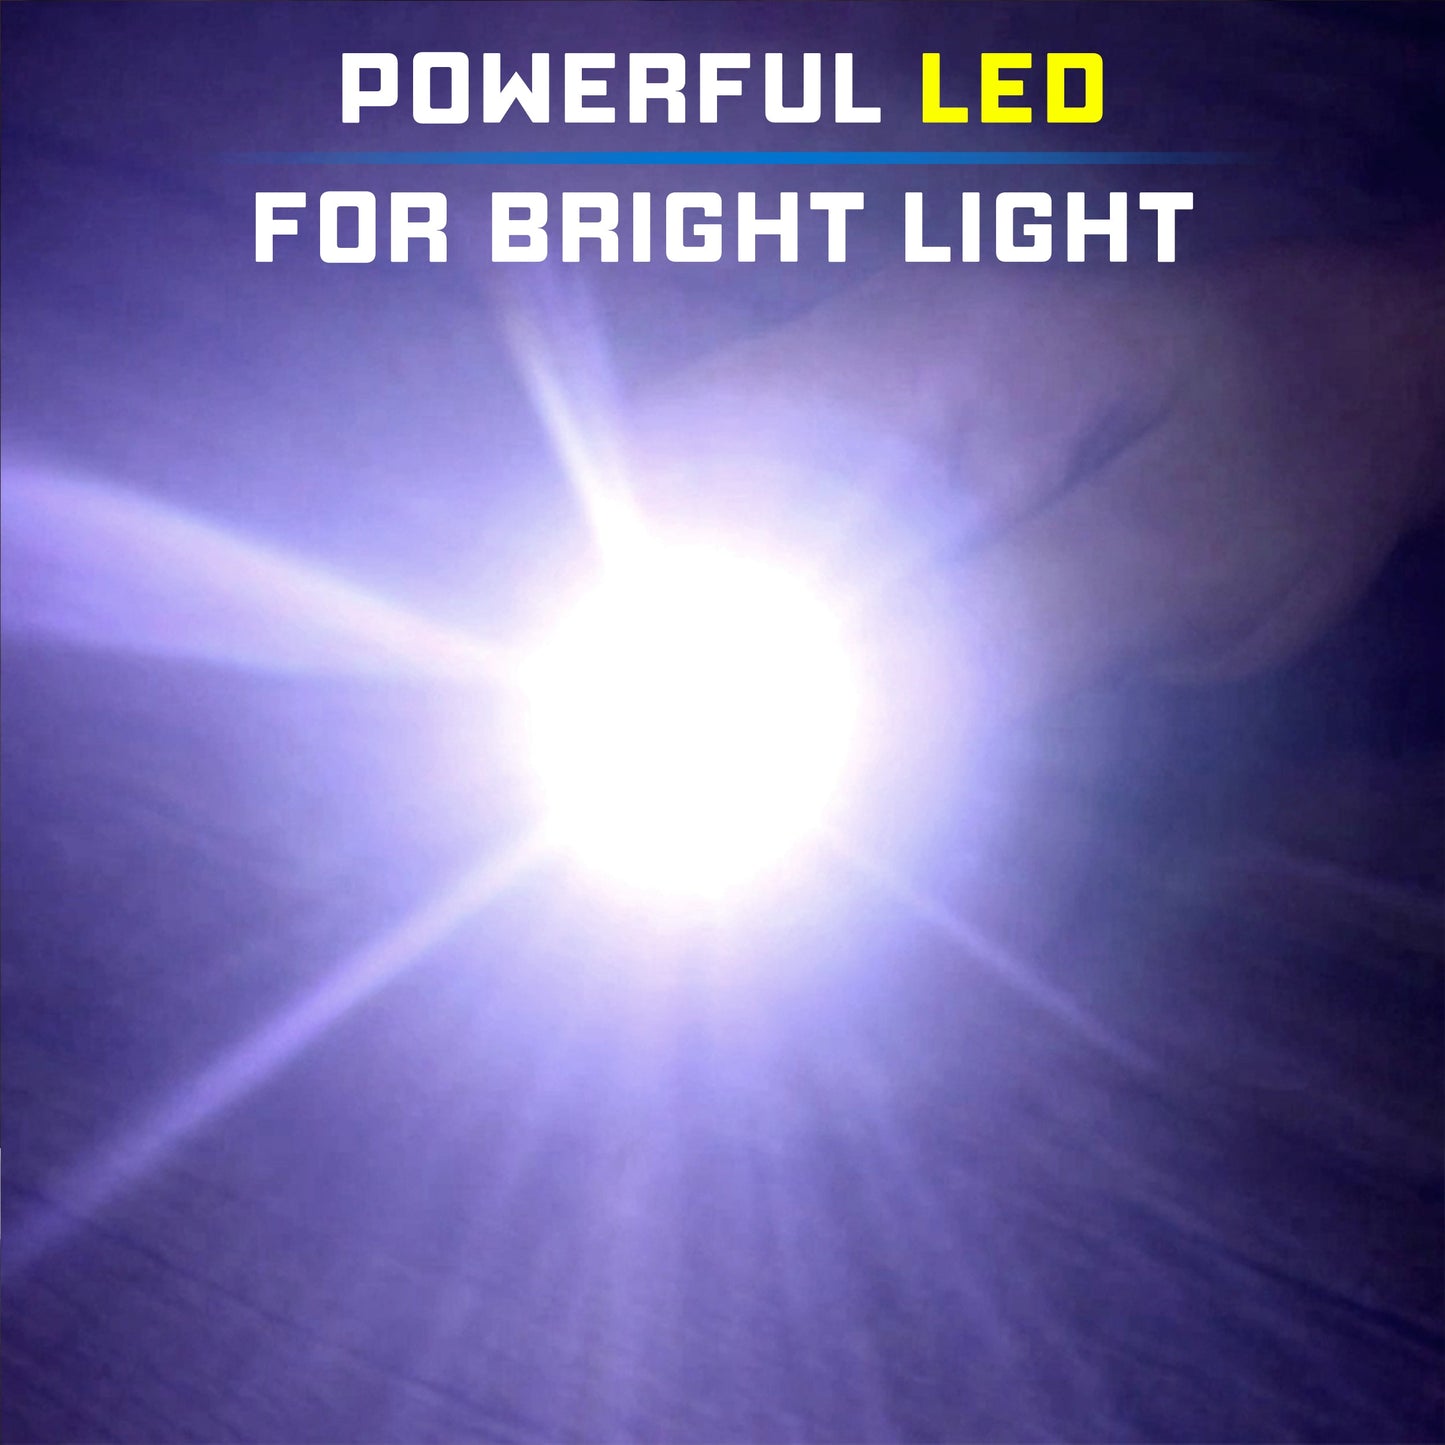 Powerful LED for bright light.